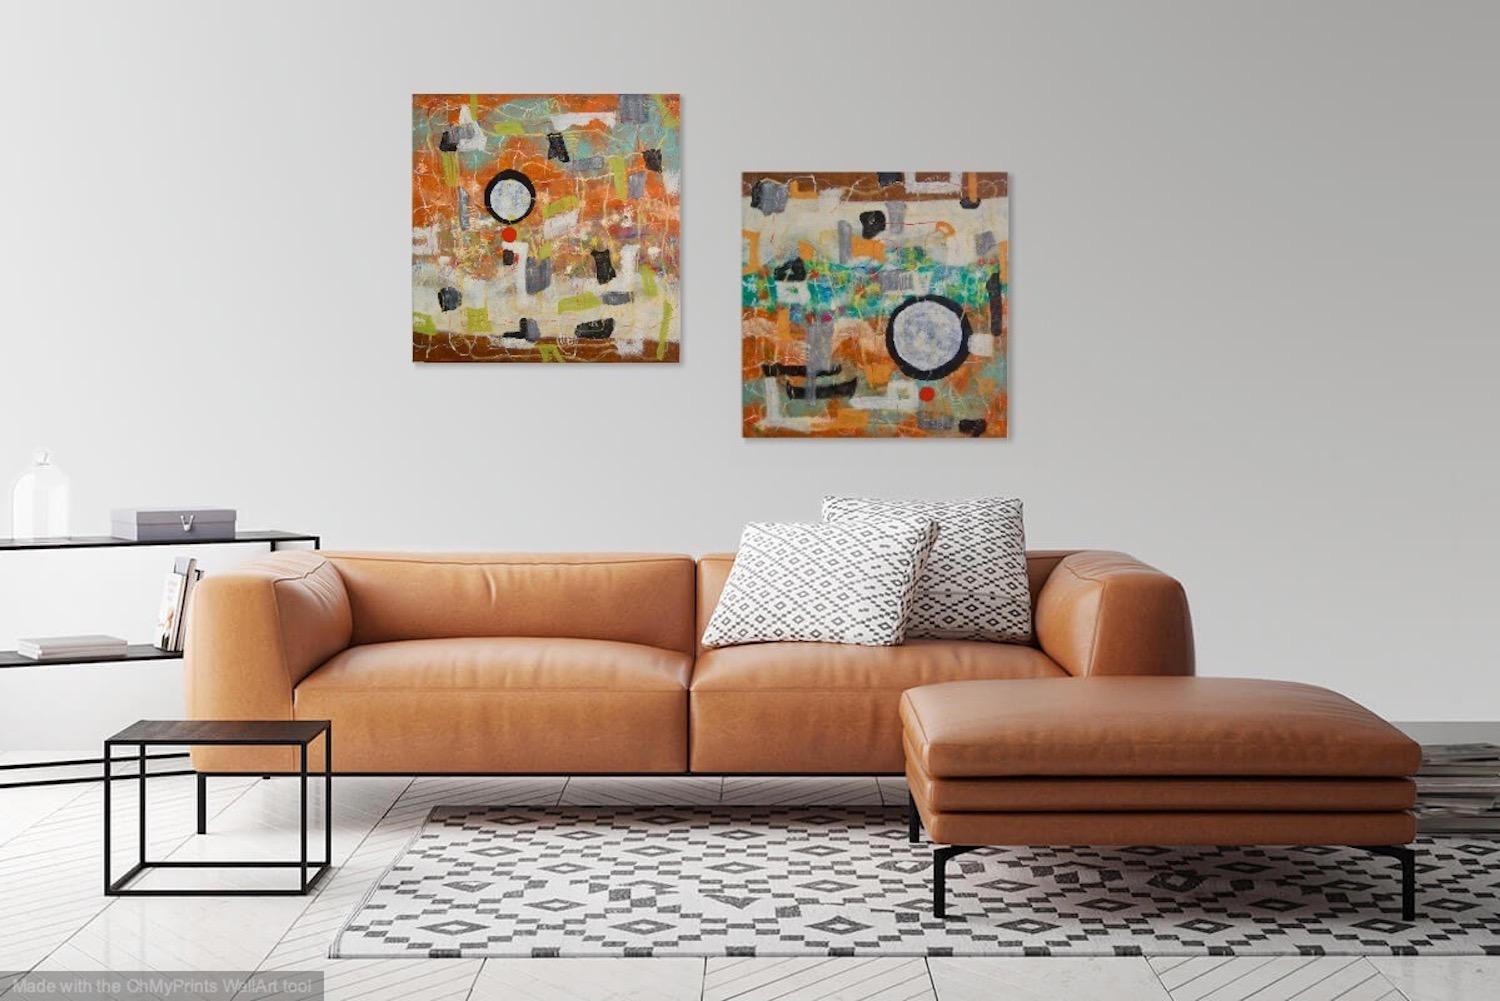 Musings whimsical zen circle abstract oil painting artwork decor, a bright cheerful orange patterns canvas art with rich impasto textures